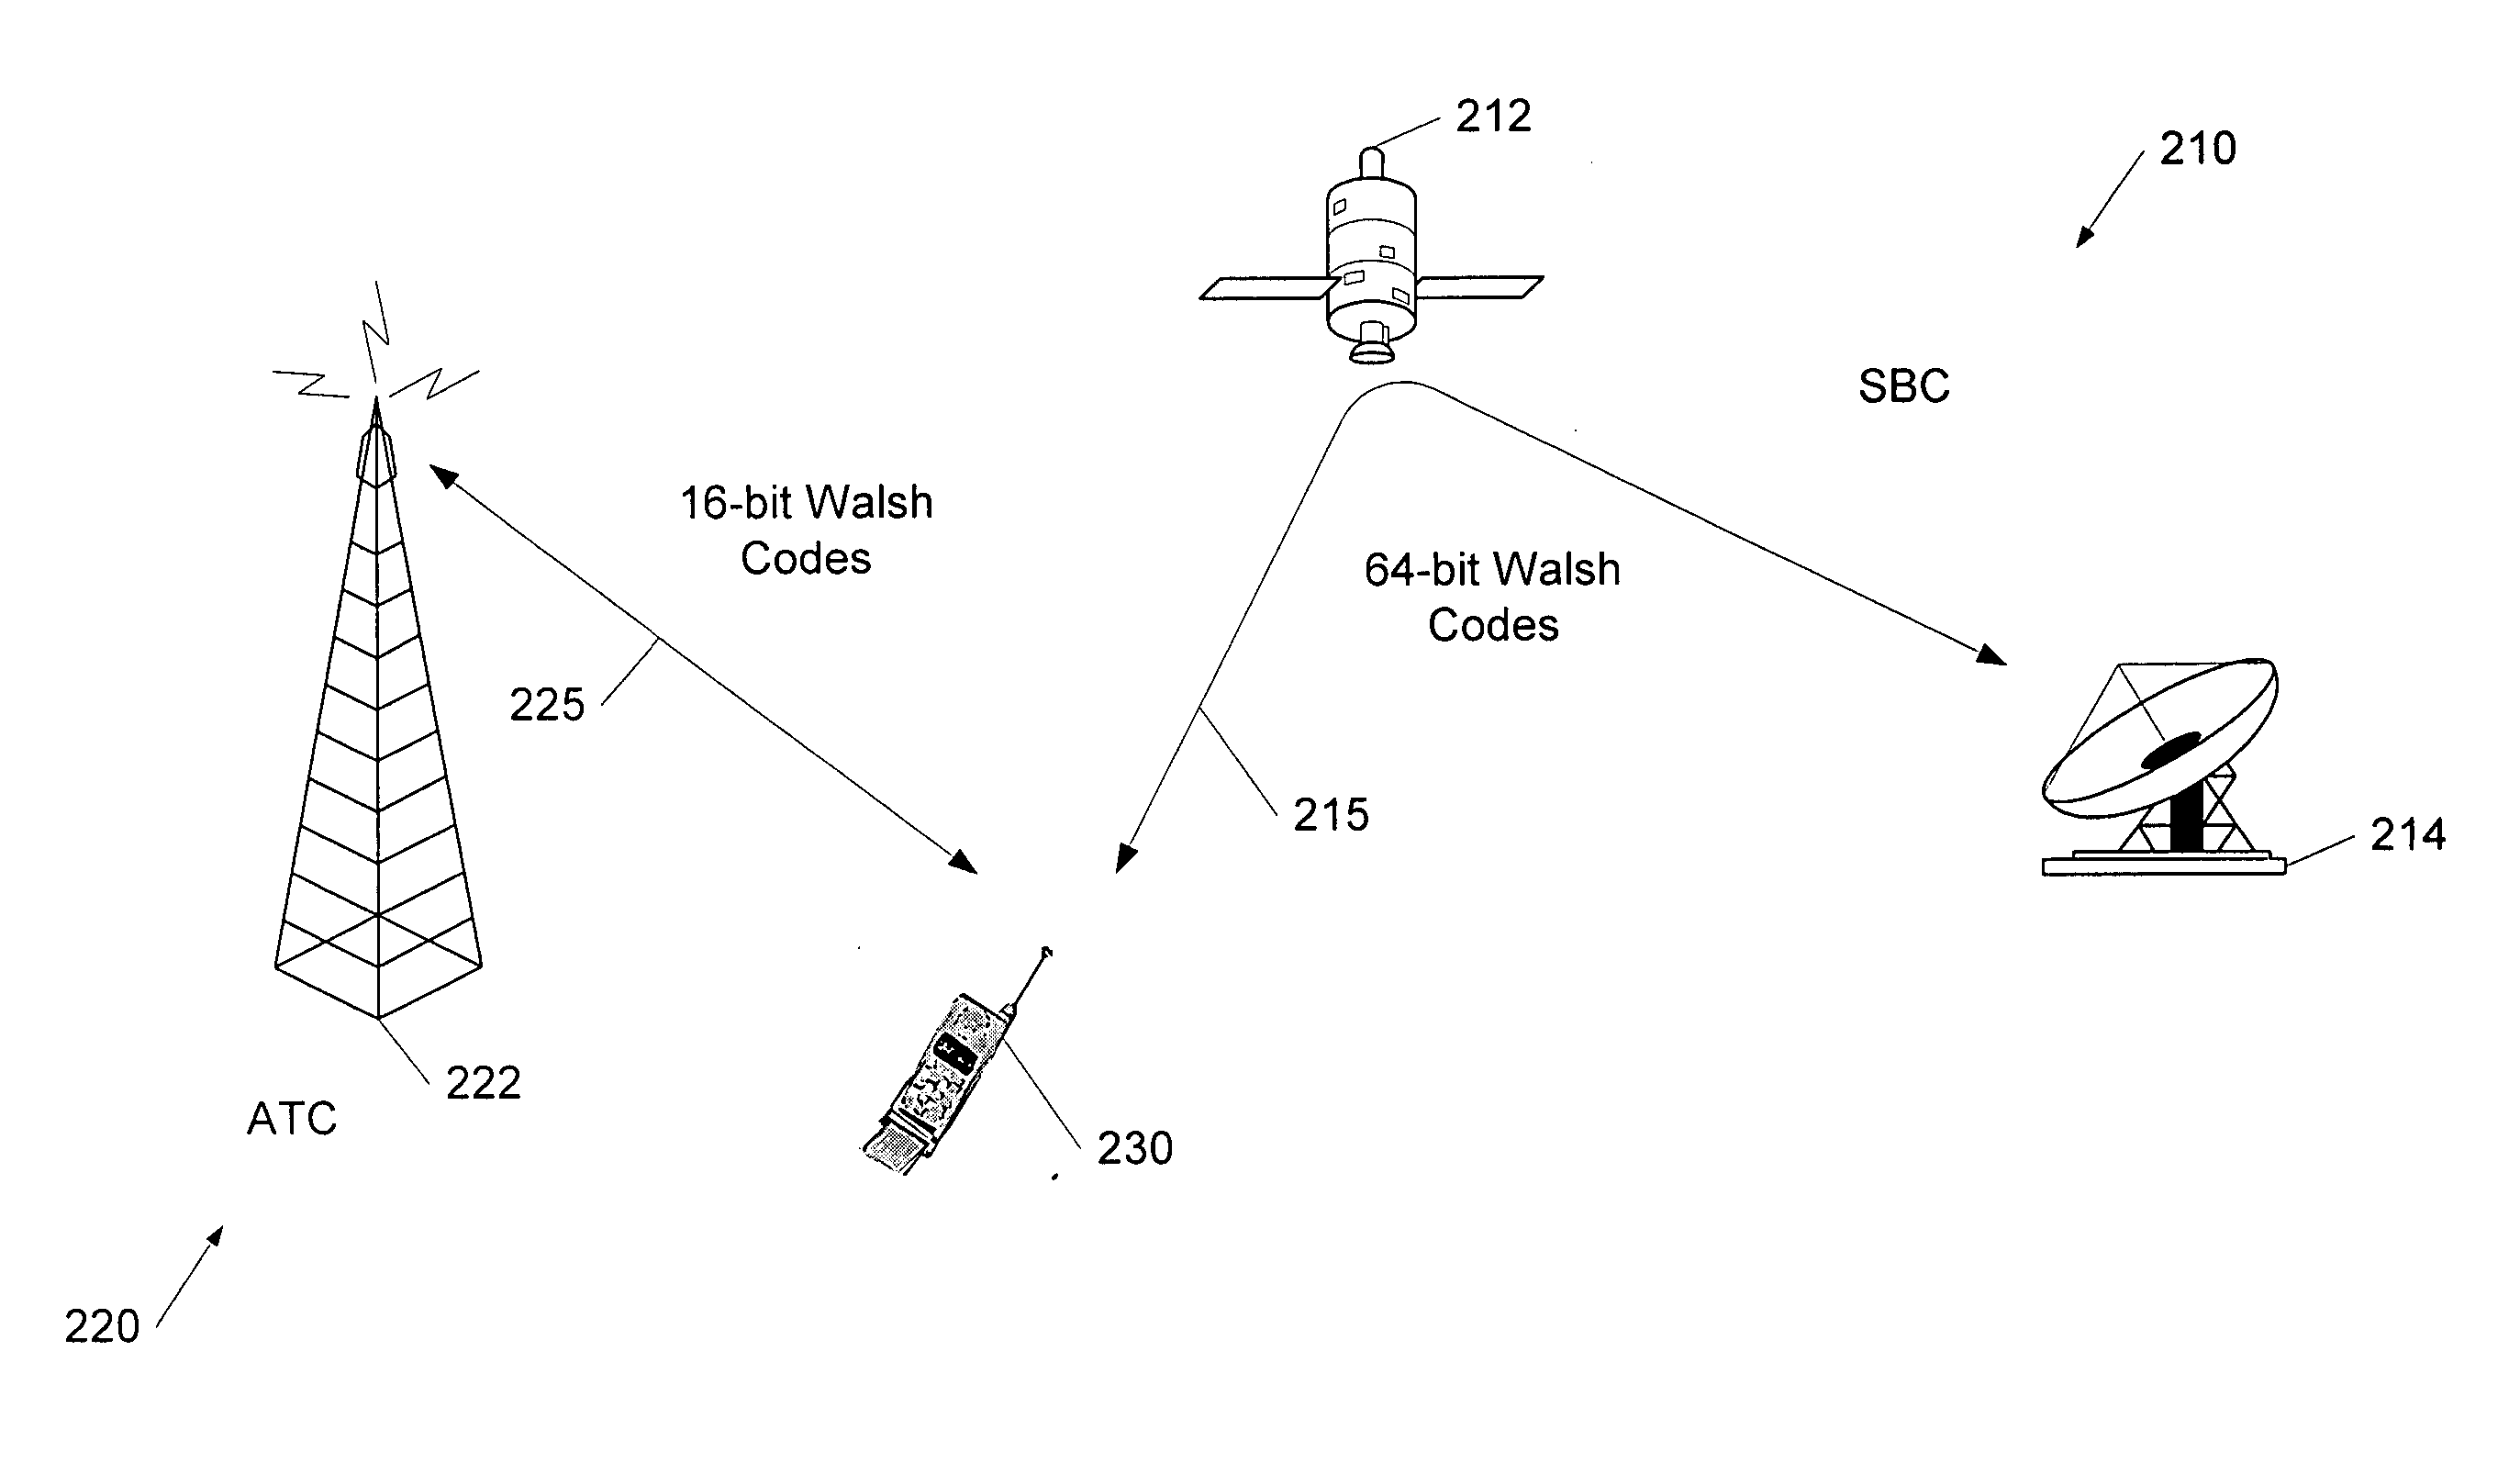 Satellite/terrestrial wireless communications systems and methods using disparate channel separation codes